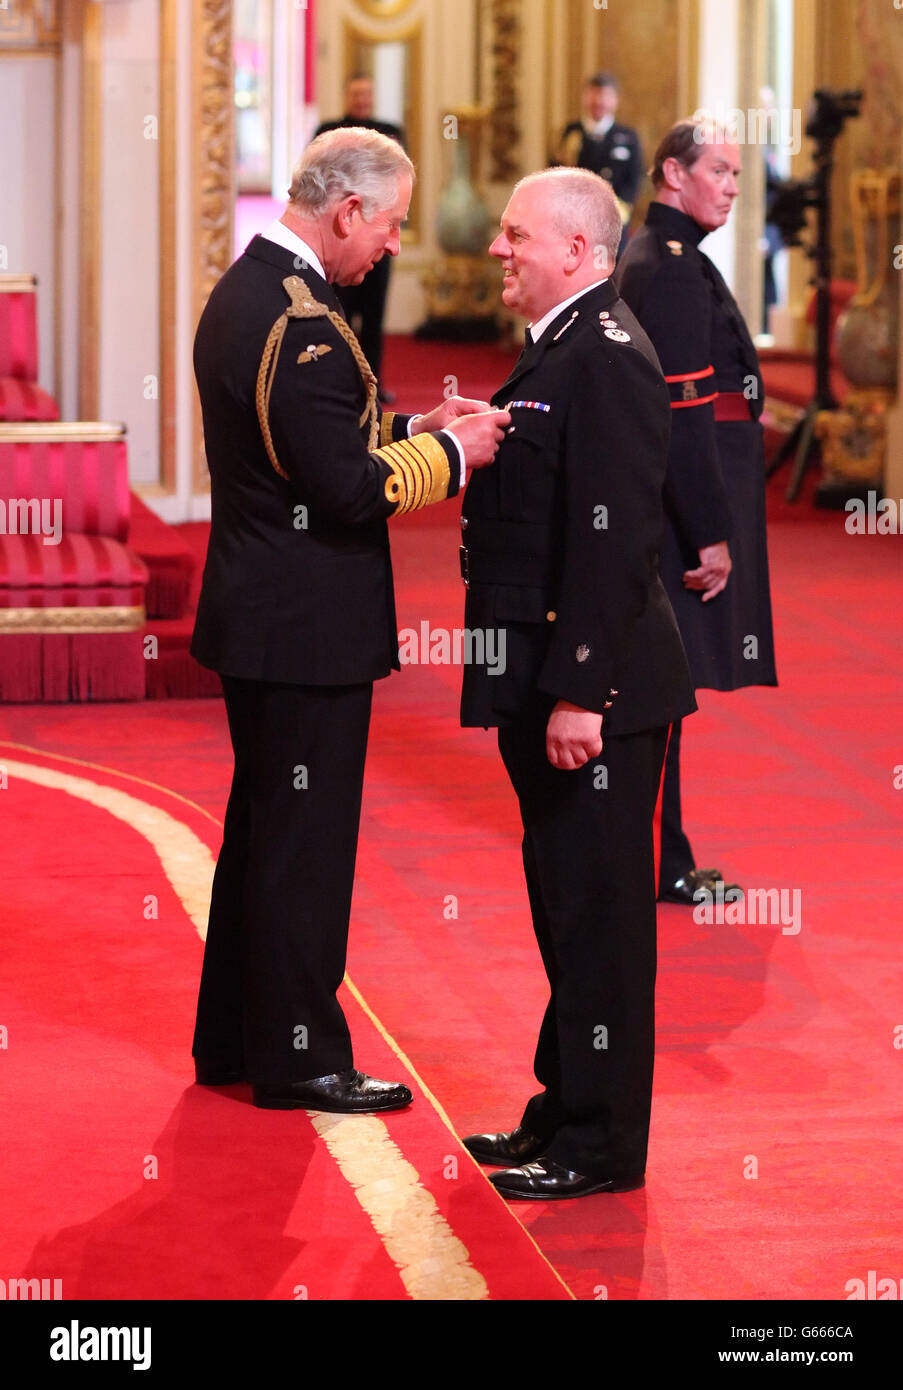 Chief Constable of Staffordshire Police Michael Cunningham is decorated with the Queen's Police Medal by the Prince of Wales at an Investiture ceremony at Buckingham Palace, central London. Stock Photo